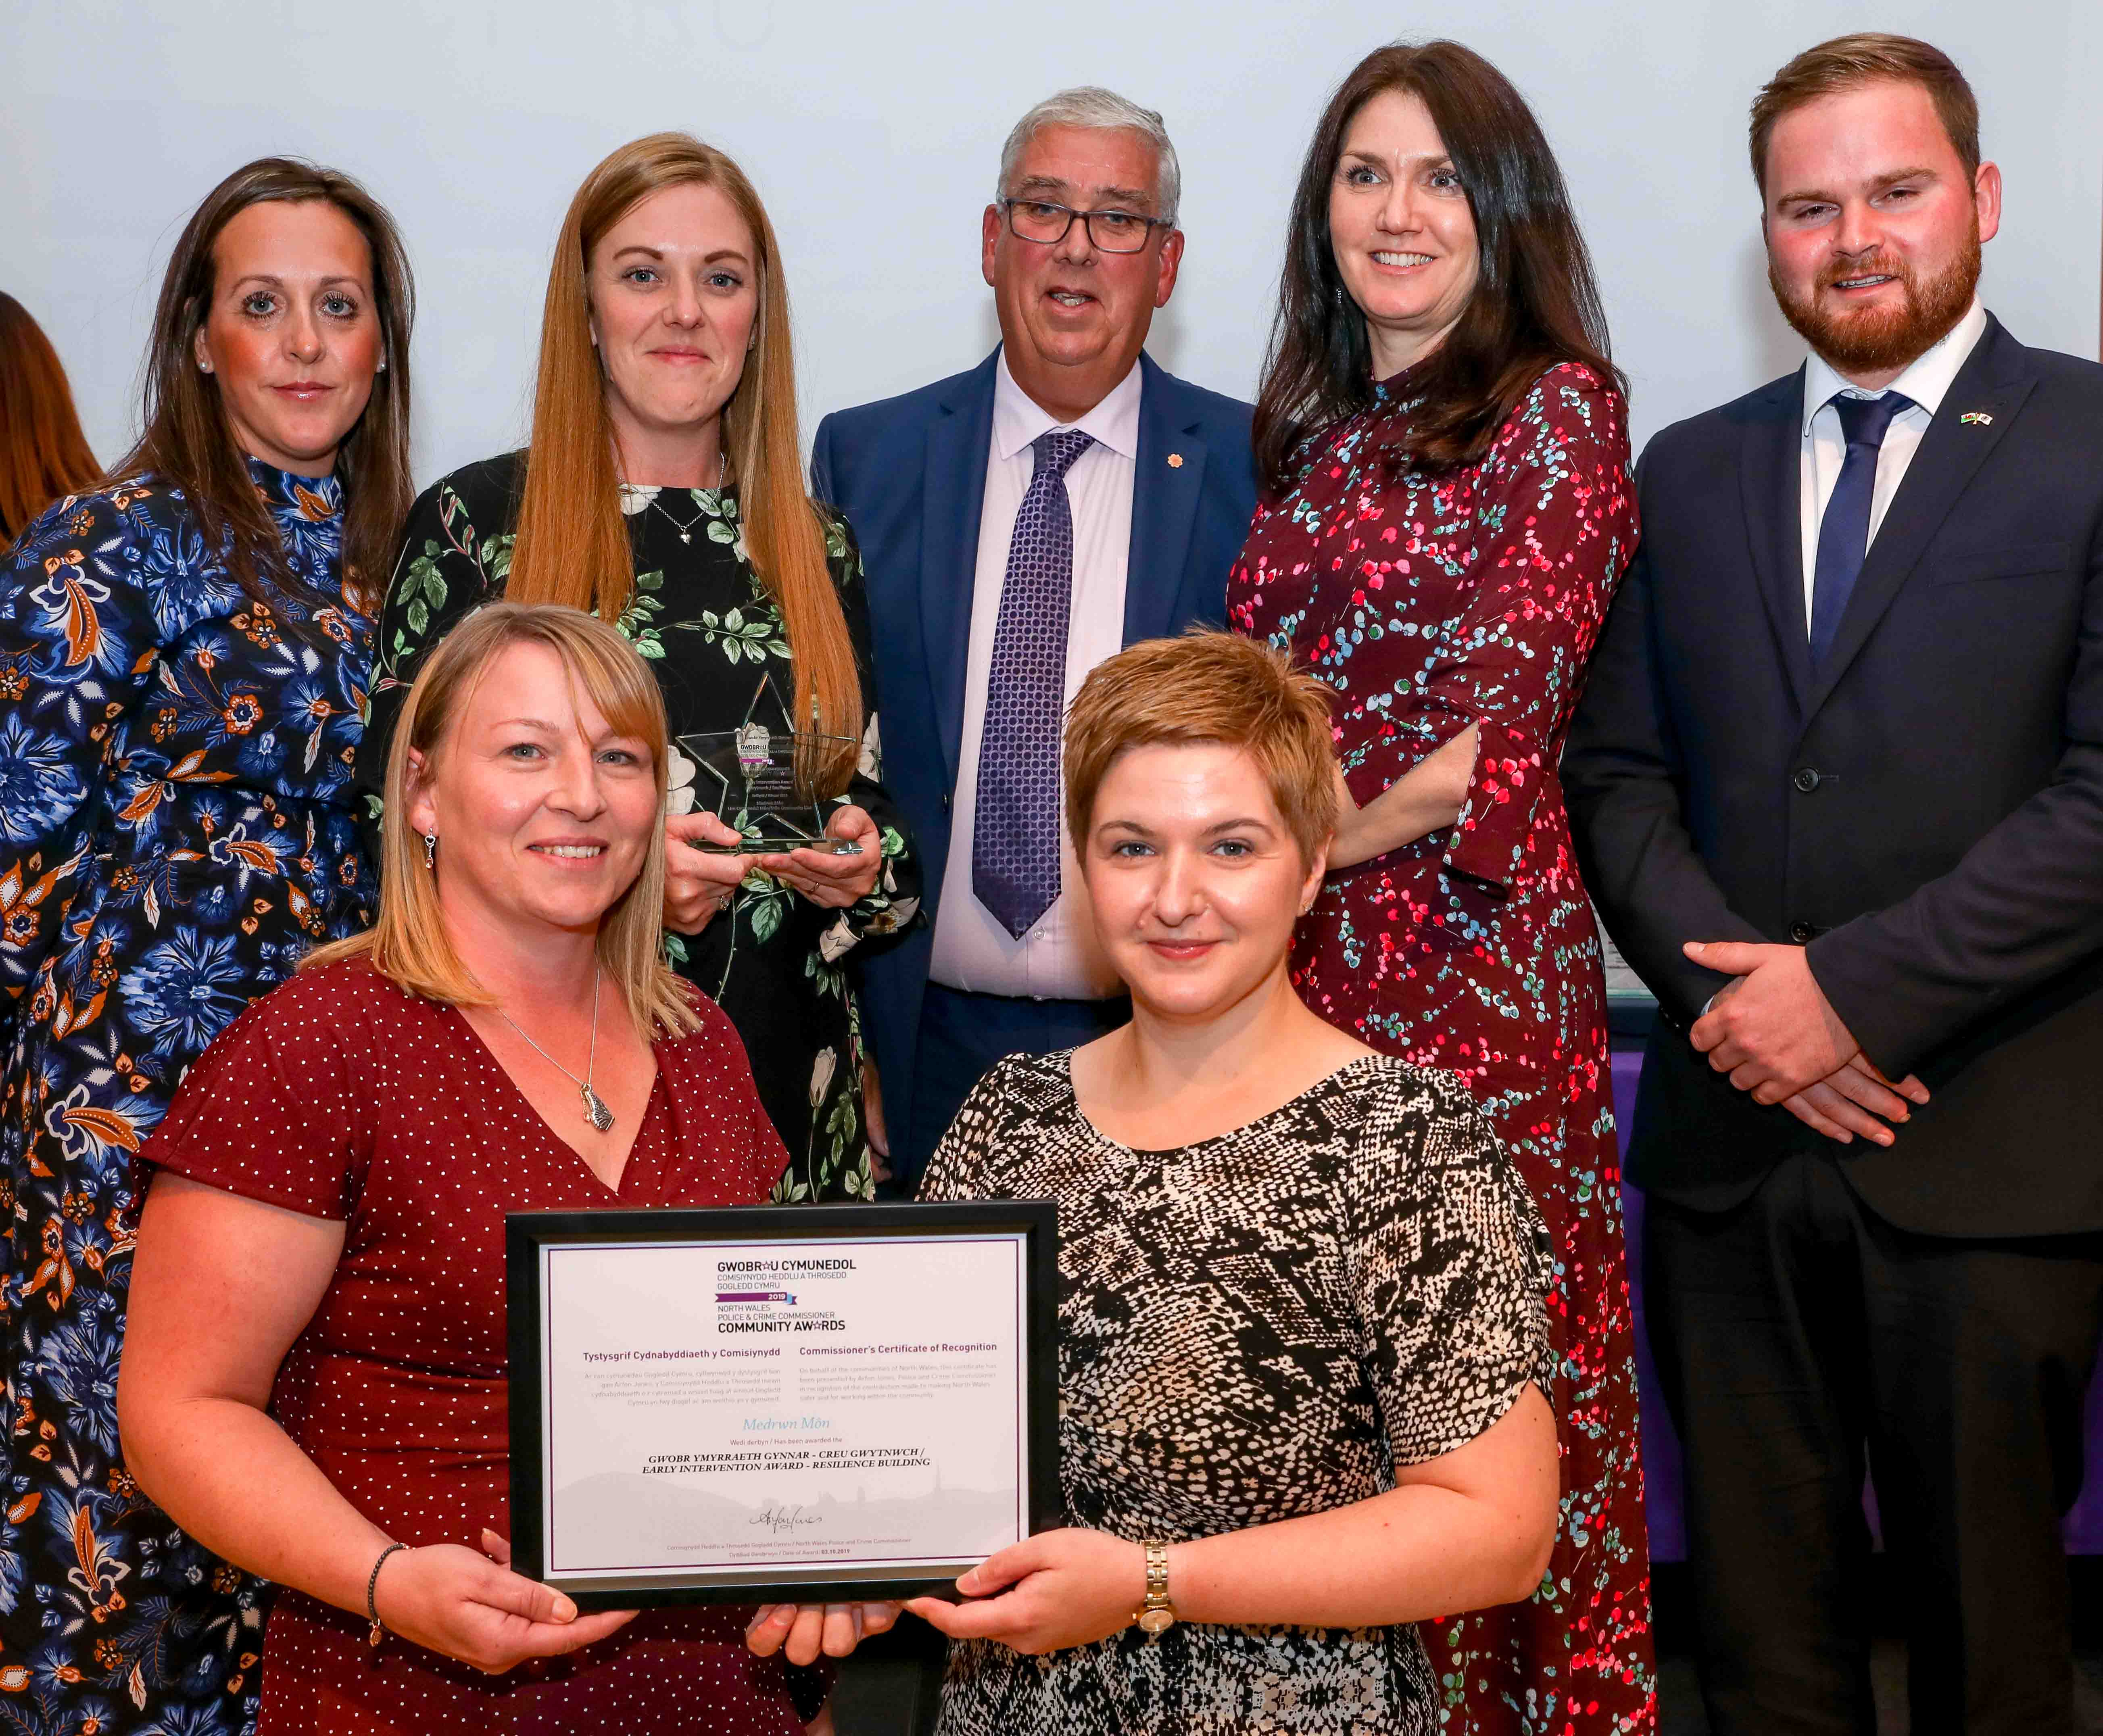 Support service for lonely people wins major award